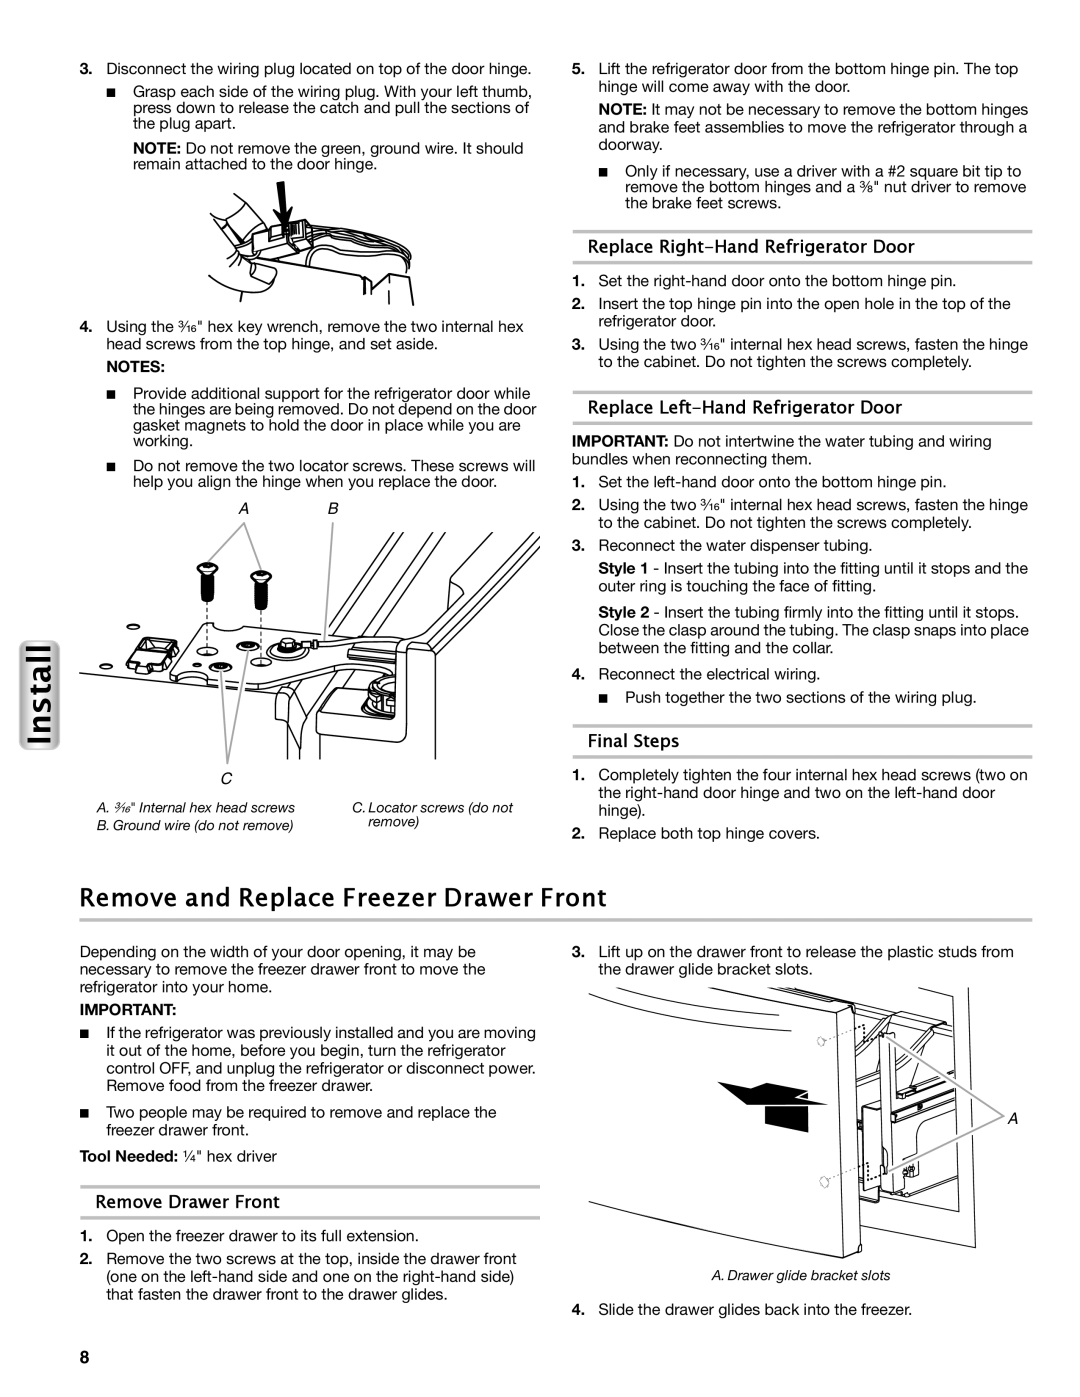 Maytag W10558104A manual Remove and Replace Freezer Drawer Front, Replace Right-Hand Refrigerator Door, Final Steps, Ab C 